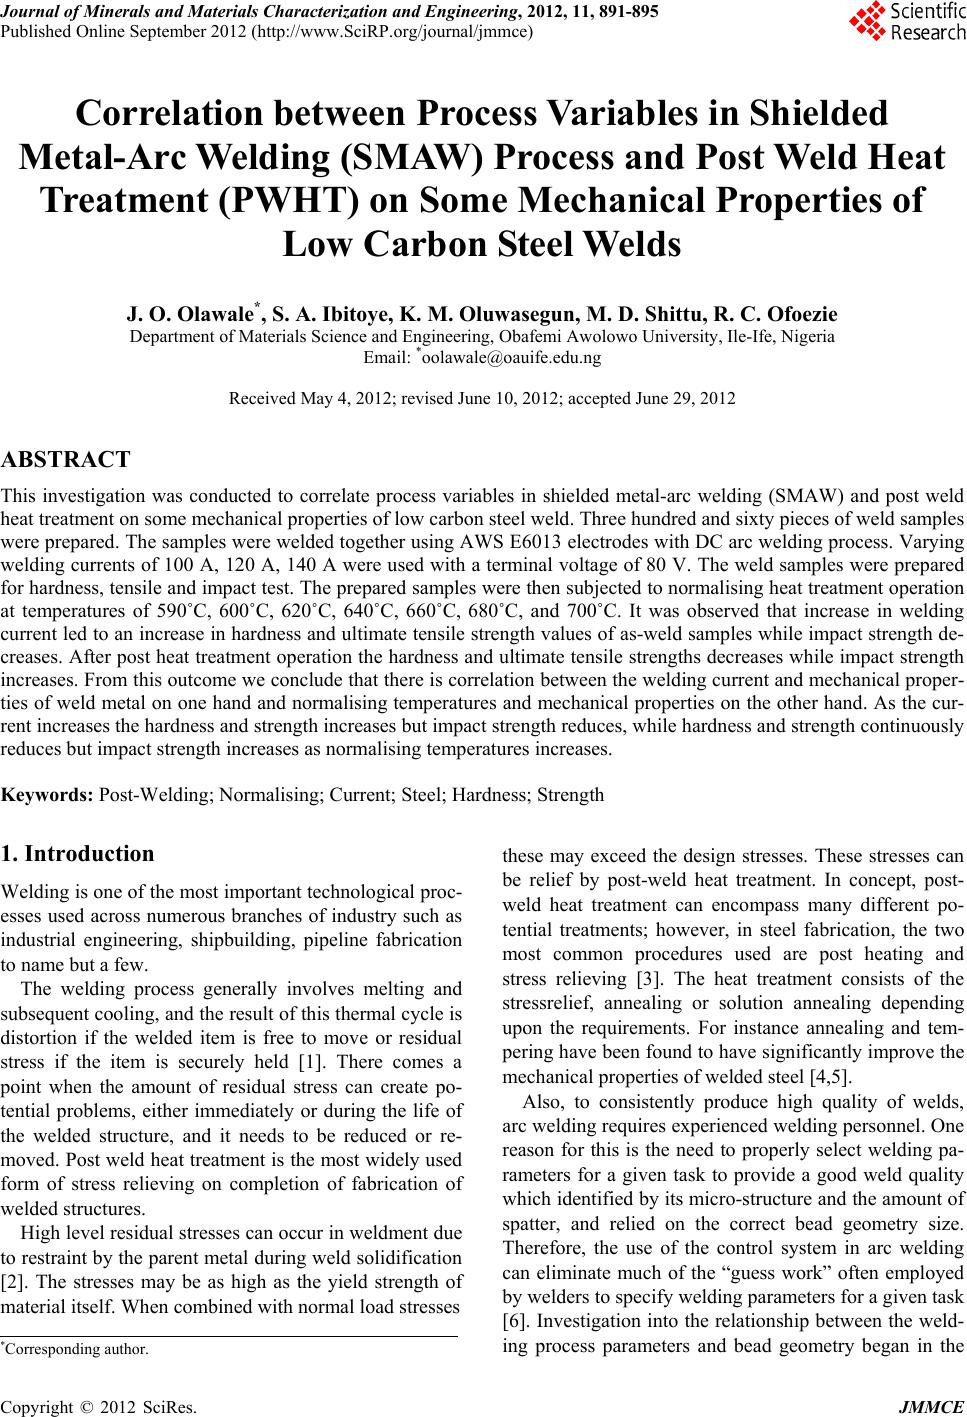 Correlation Between Process Variables In Shielded Metal Arc Welding Smaw Process And Post Weld Heat Treatment Pwht On Some Mechanical Properties Of Low Carbon Steel Welds